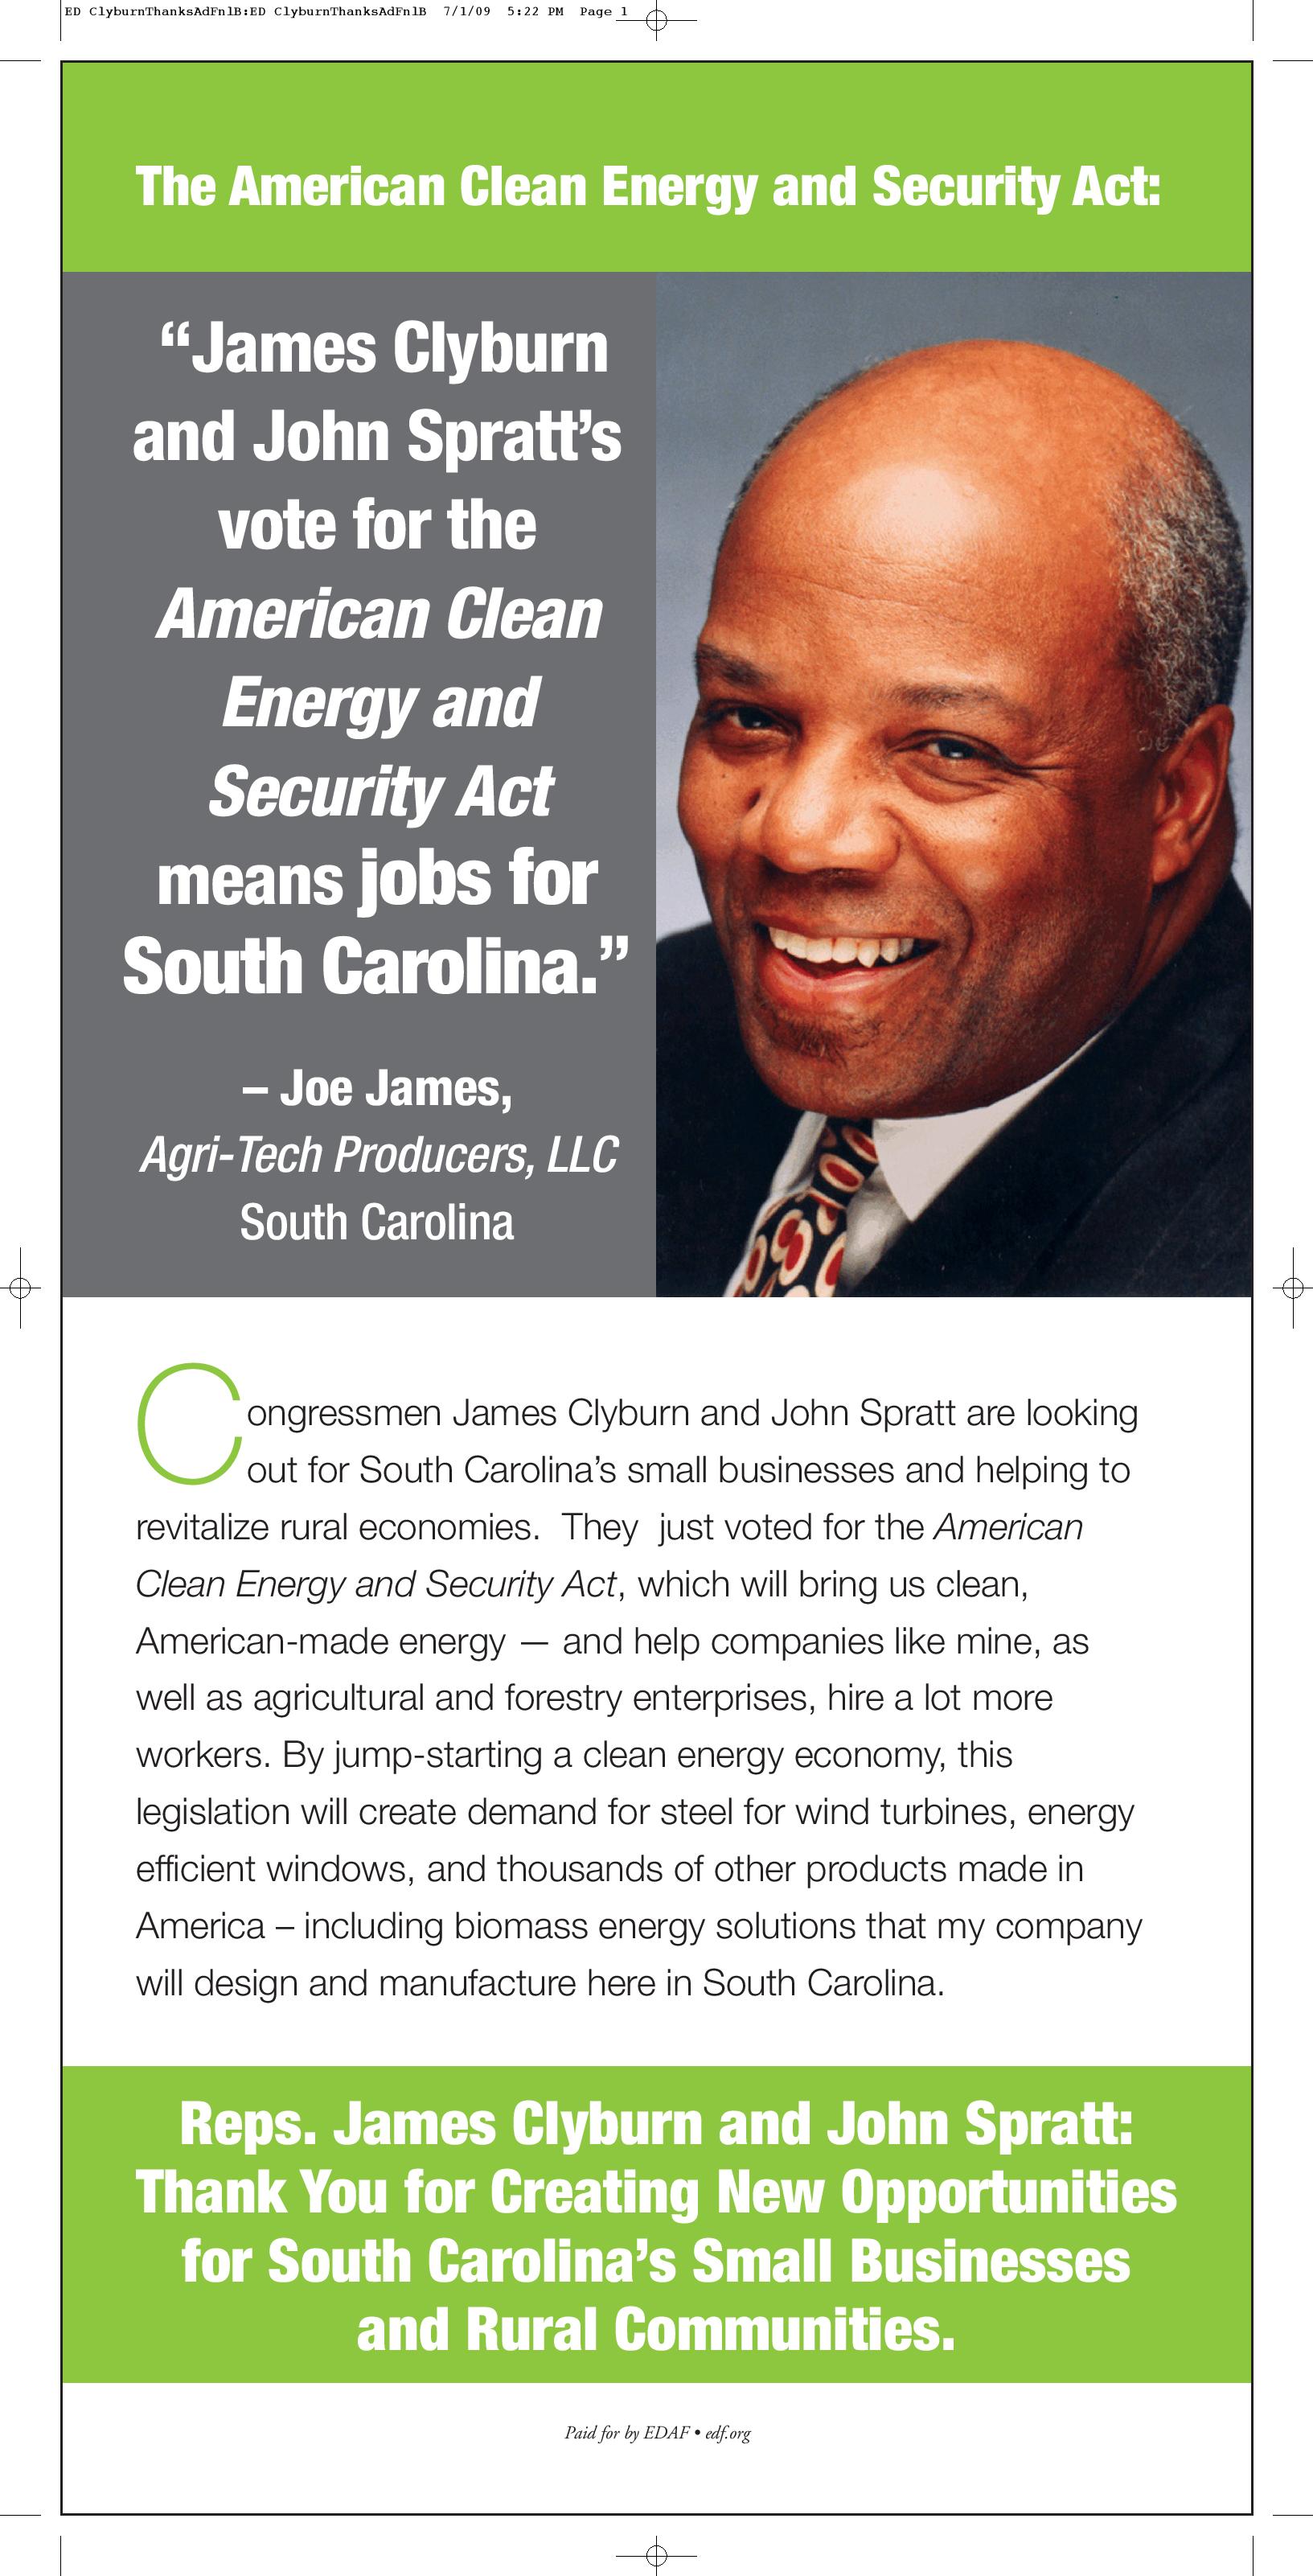 Thank You for Supporting the American Clean Energy and Security Act: Reps. James Clyburn and John Spratt